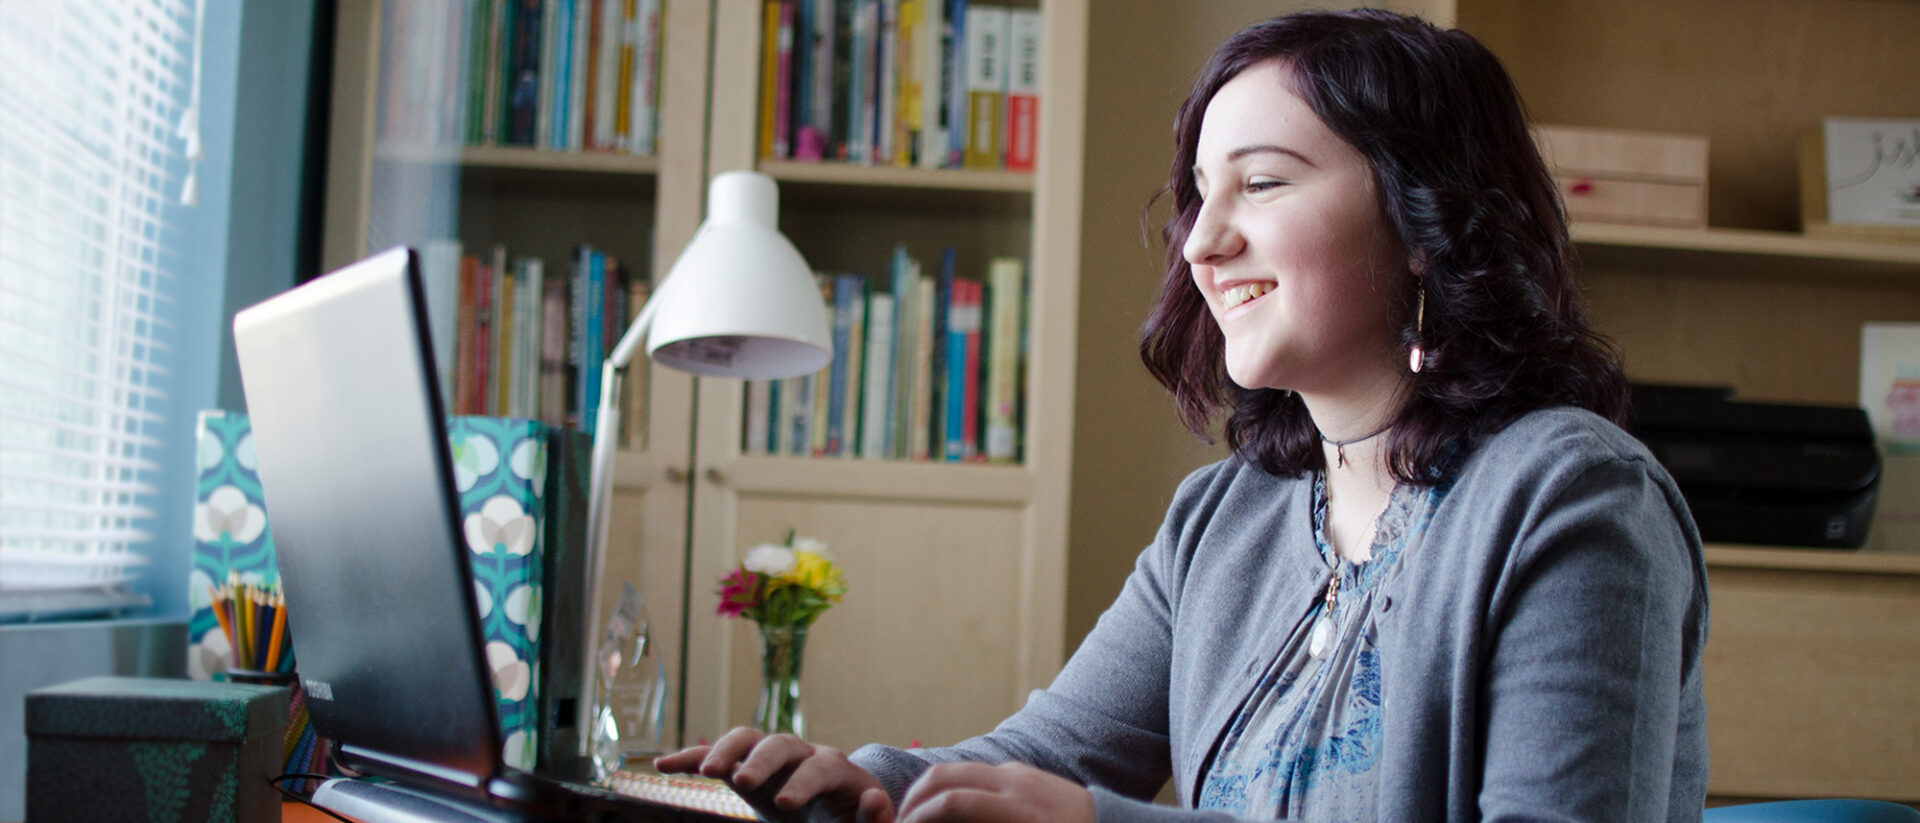 Girl attending to an online class at home